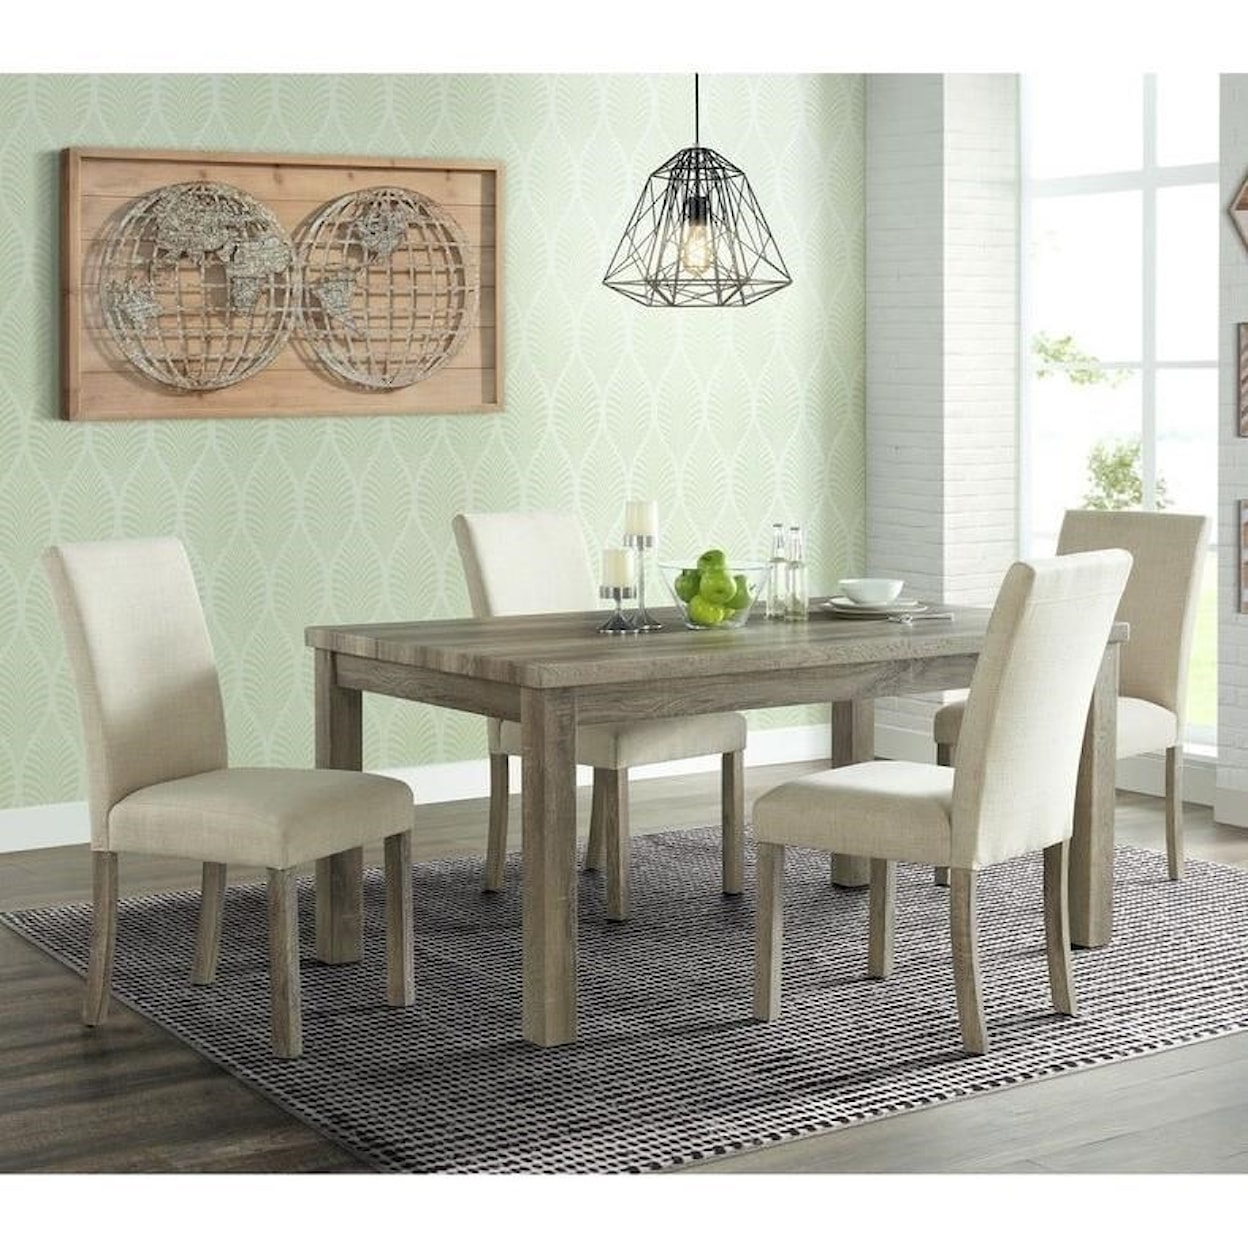 EFO Oak Lawn 5-Piece Table and Chair Set